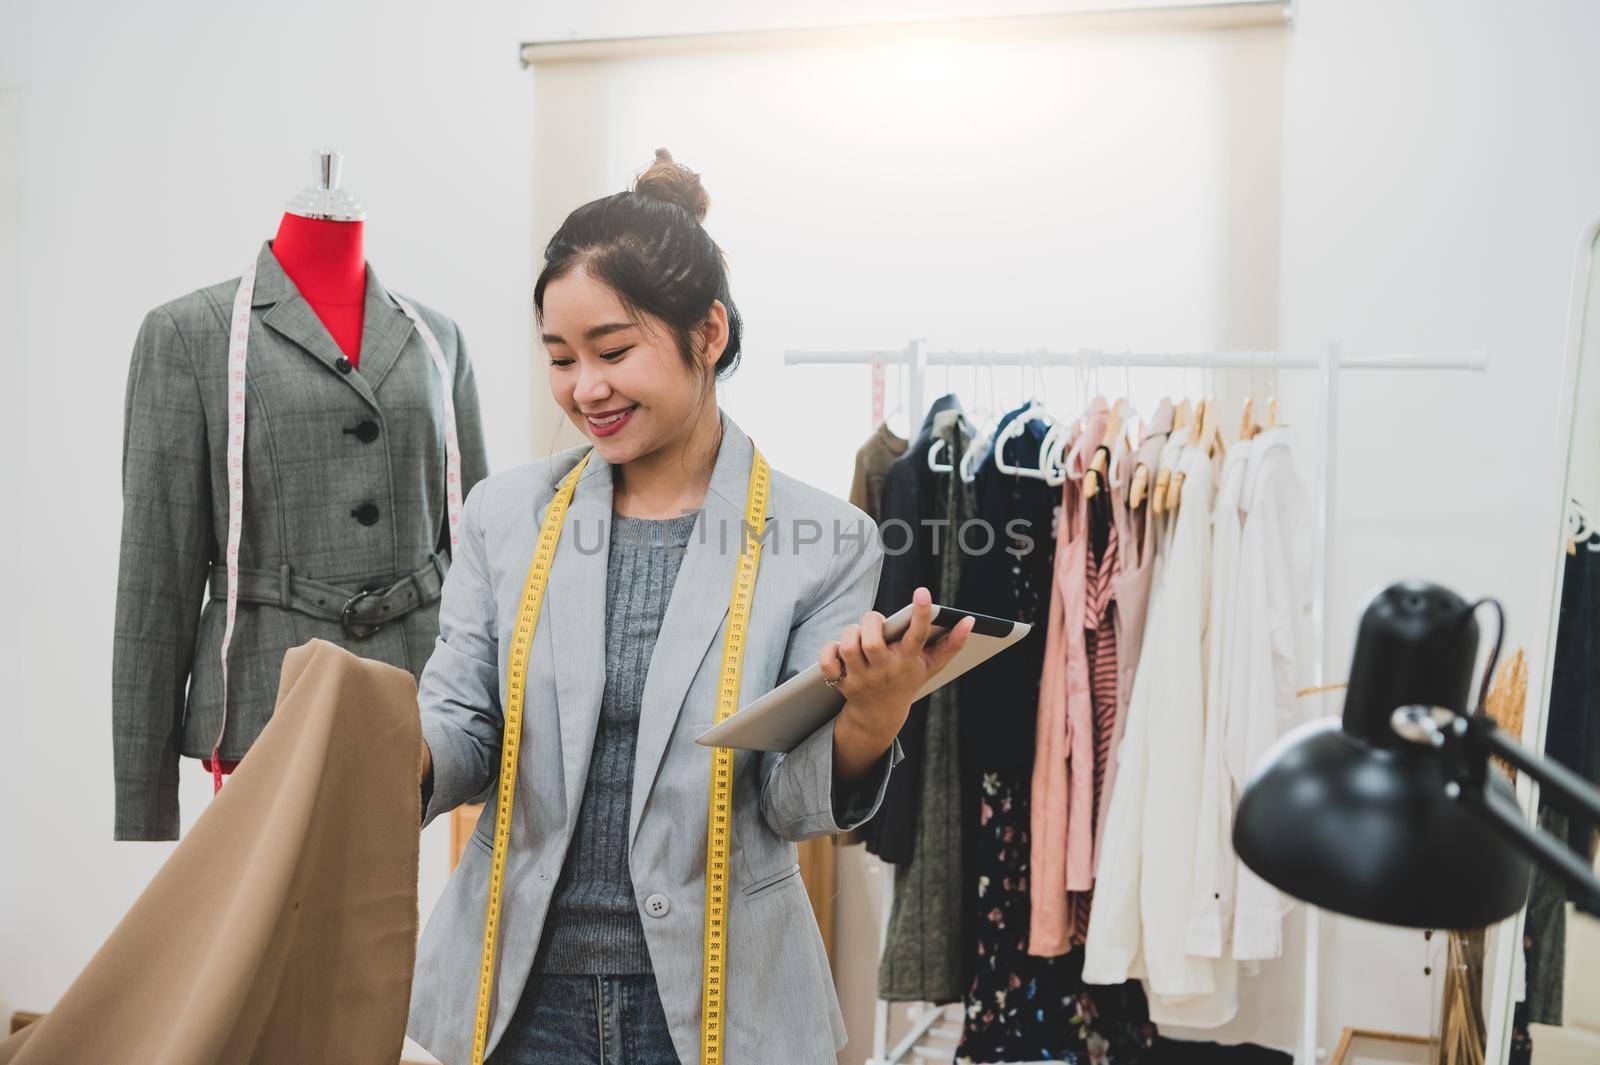 Fashion designer stylist in business owner workshop with tablet and customer contact list. Tailor and sew concept. Portrait of happy casual trendy fashion businesswoman in studio. Job and occupation